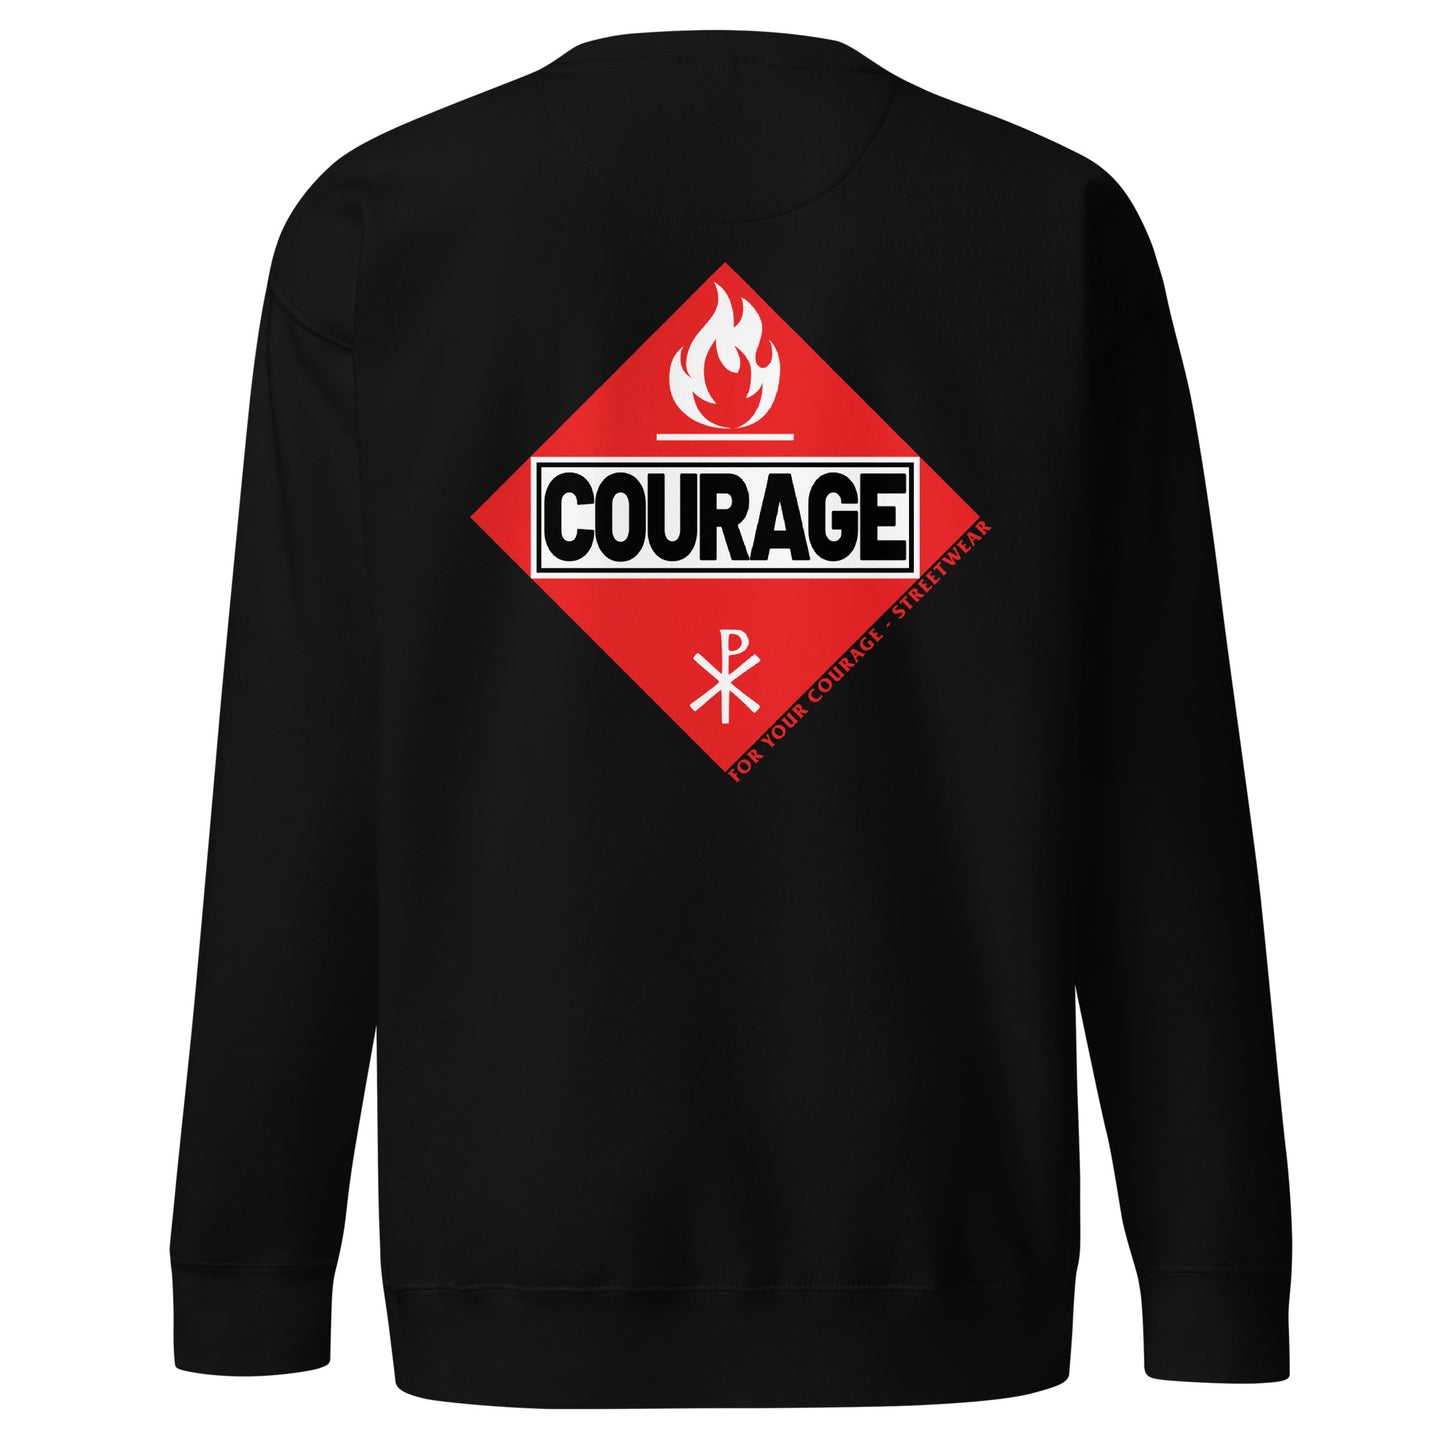 Courage Under Fire Sweatshirt - For Your Courage